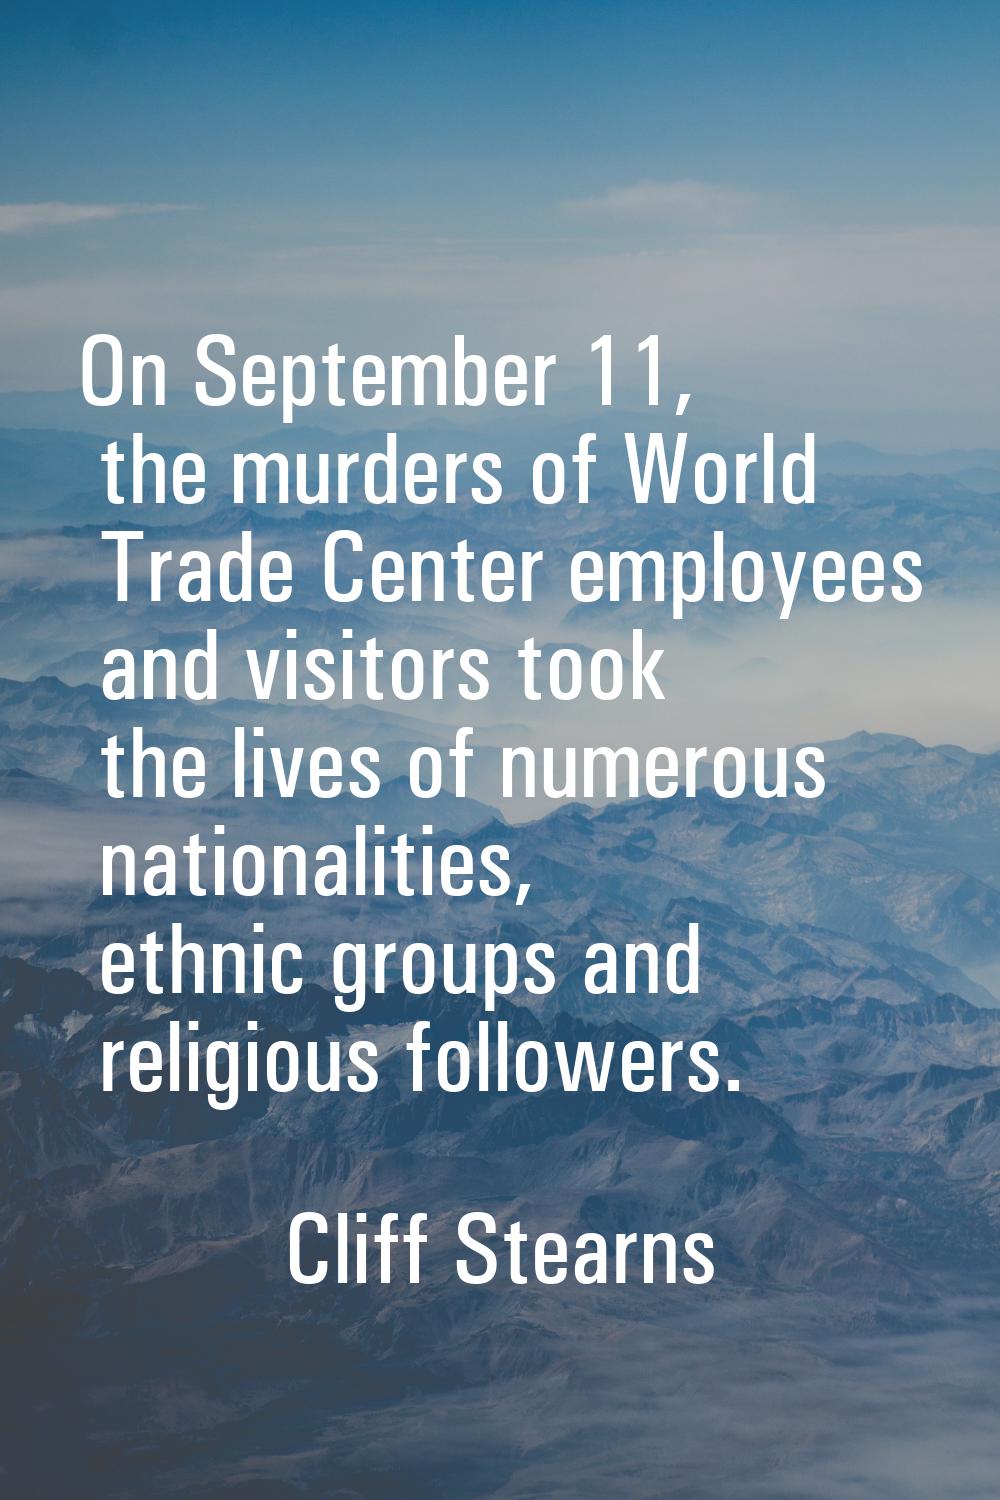 On September 11, the murders of World Trade Center employees and visitors took the lives of numerou